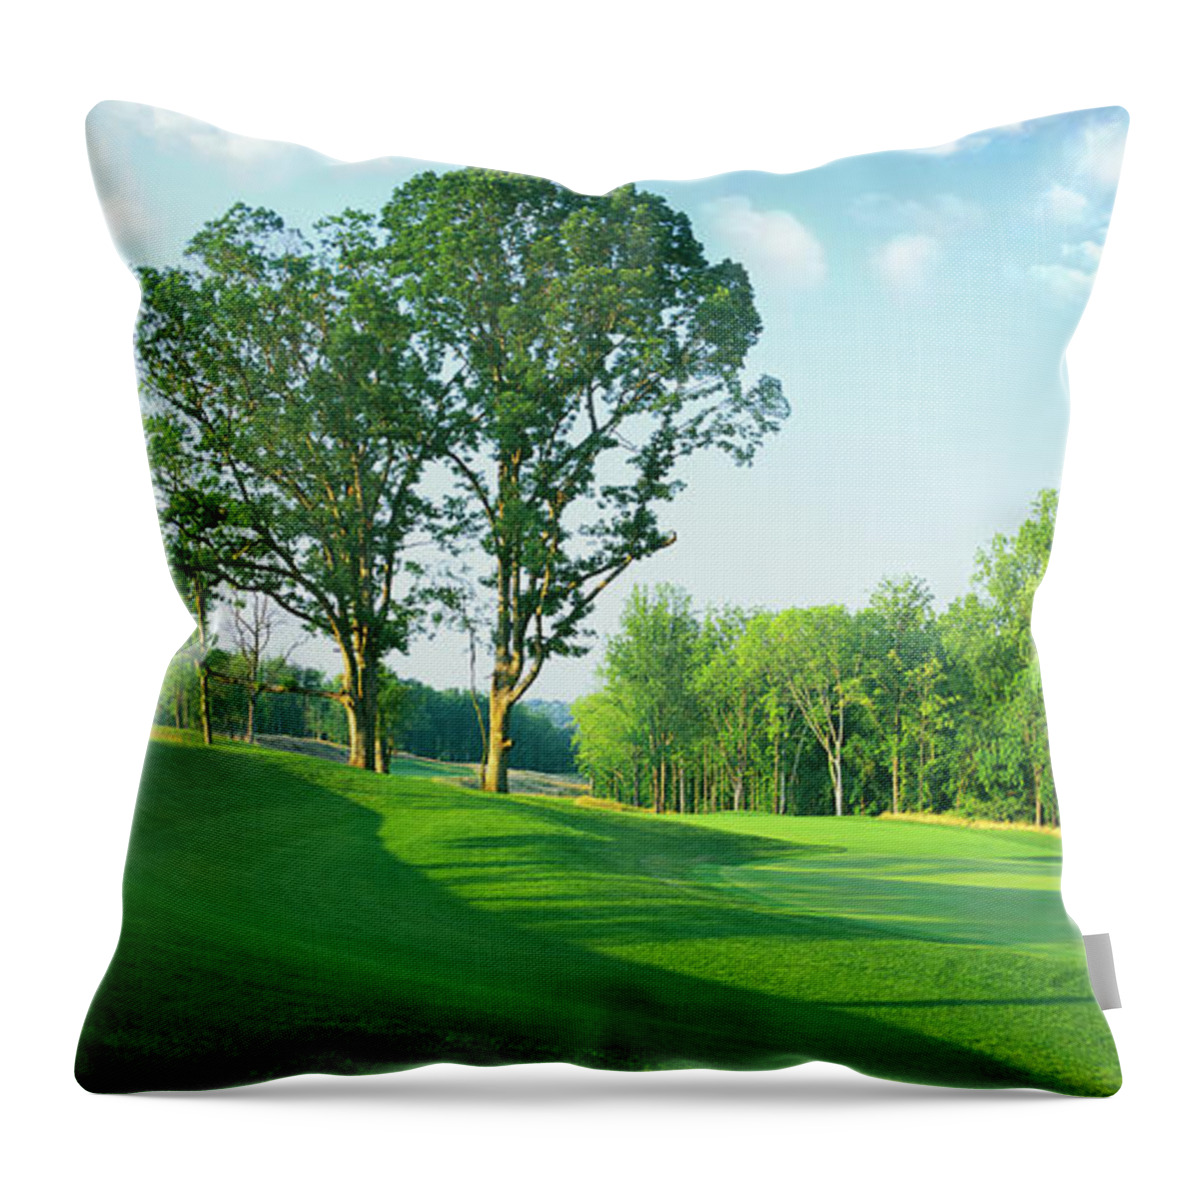 Shadow Throw Pillow featuring the photograph Golf Course Green And Fairway by Peter Gridley